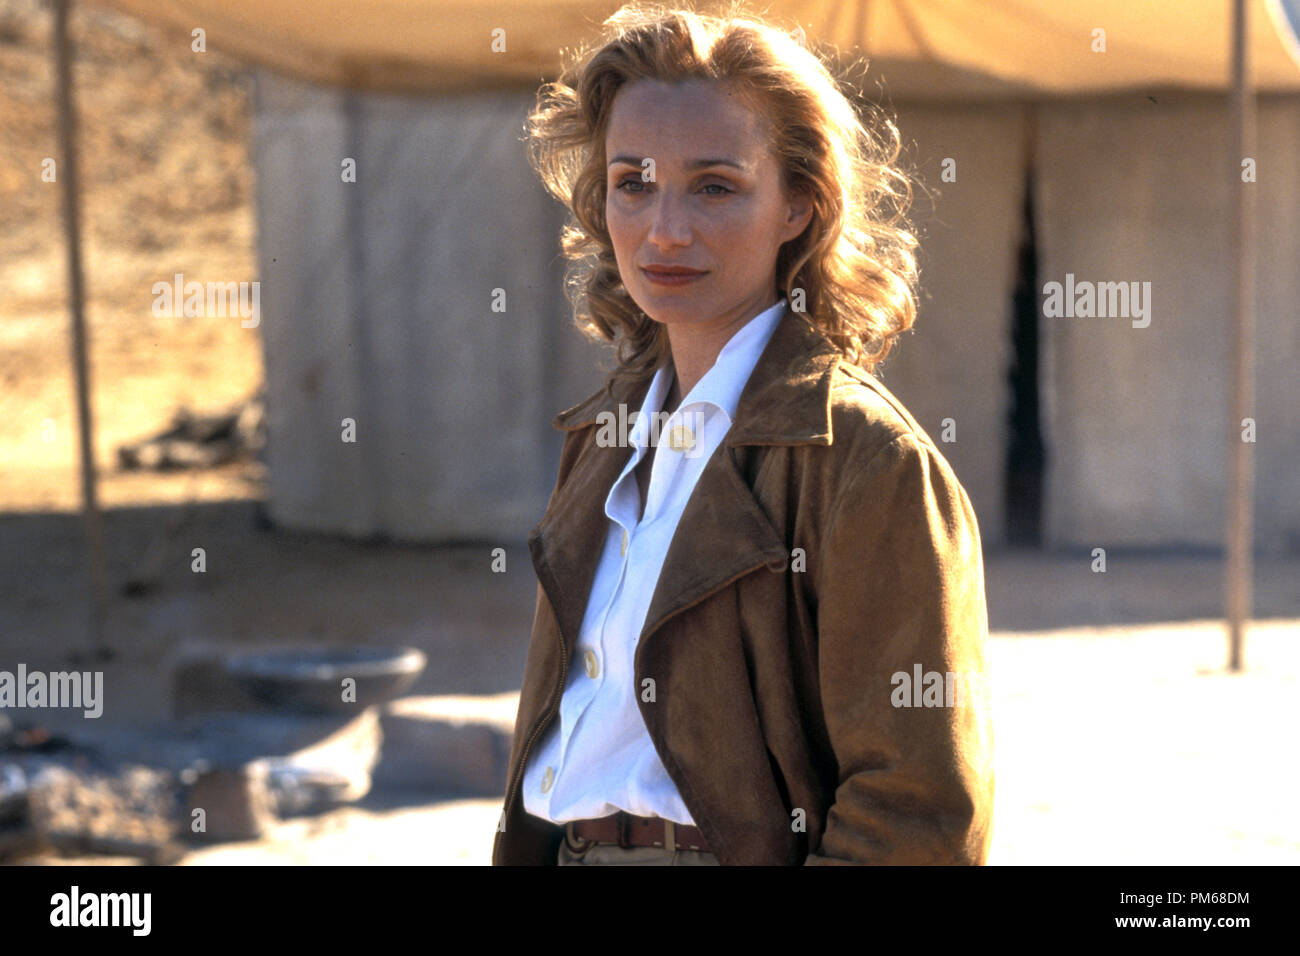 Film Still from 'The English Patient' Kristin Scott Thomas © 1996 Miramax Photo Credit: Phil Bray  File Reference # 31042152THA  For Editorial Use Only - All Rights Reserved Stock Photo